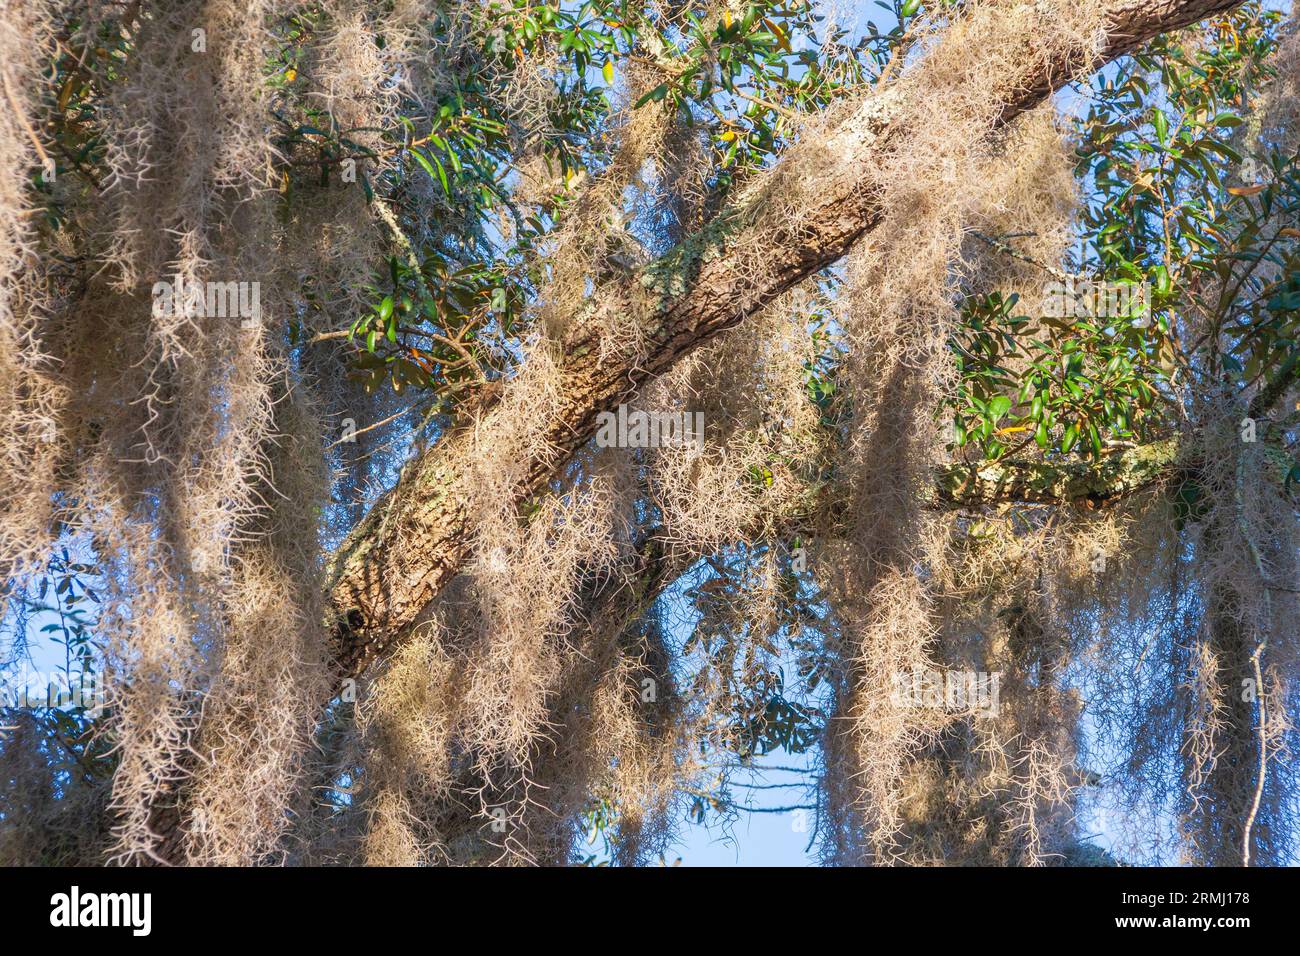 Spanish Moss, Tillandsia usneoides, an air-feeding plant or epiphyte, on trees at Bellingrath Gardens near Moblie, Alabama in early spring. Stock Photo